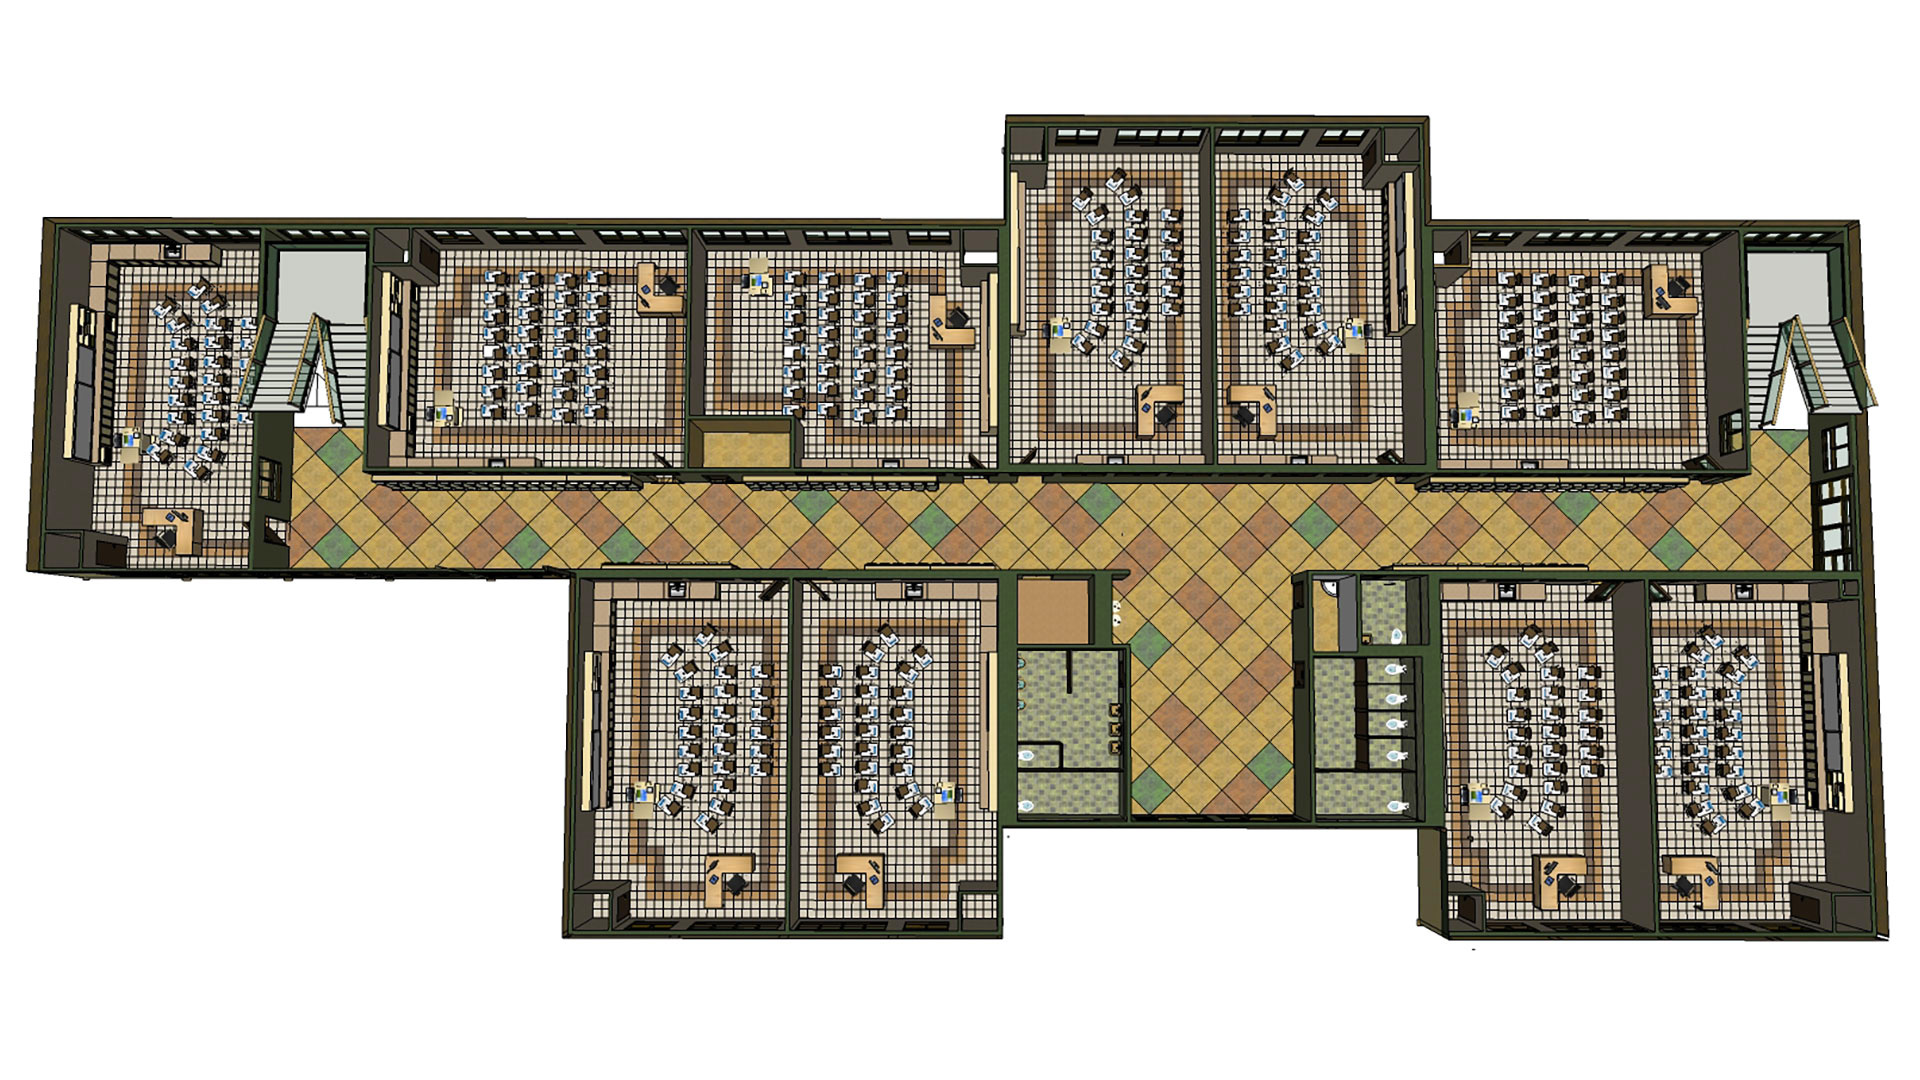 Rendering of floor plan of classroom wing, with several classrooms of different sizes, and restroom areas.